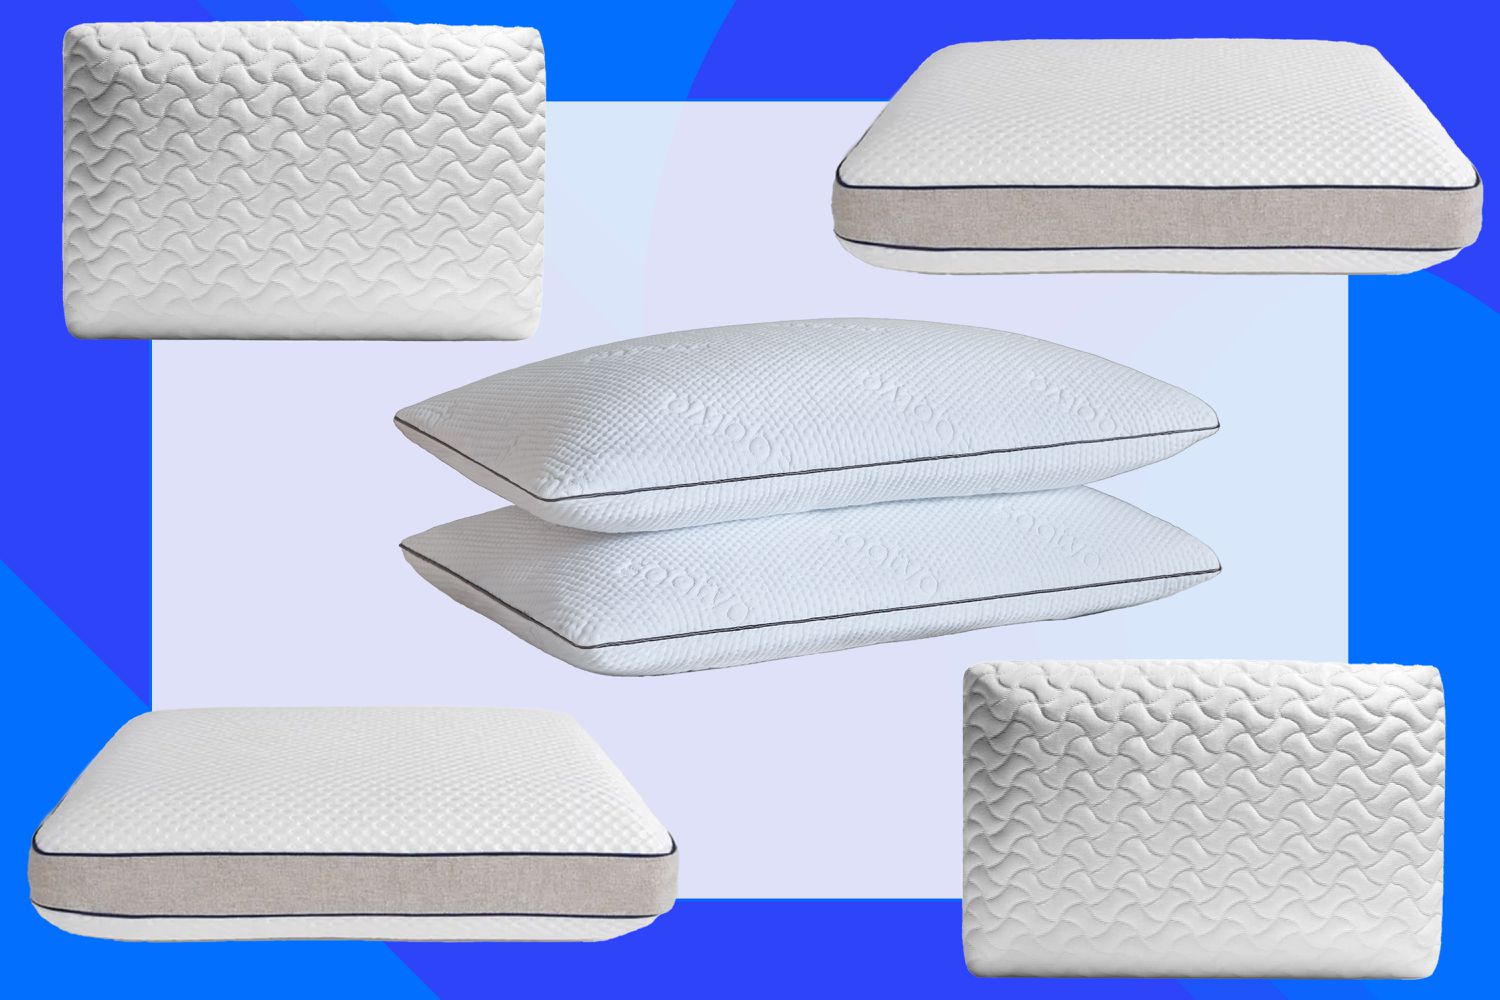 How To Use A Memory Foam Pillow